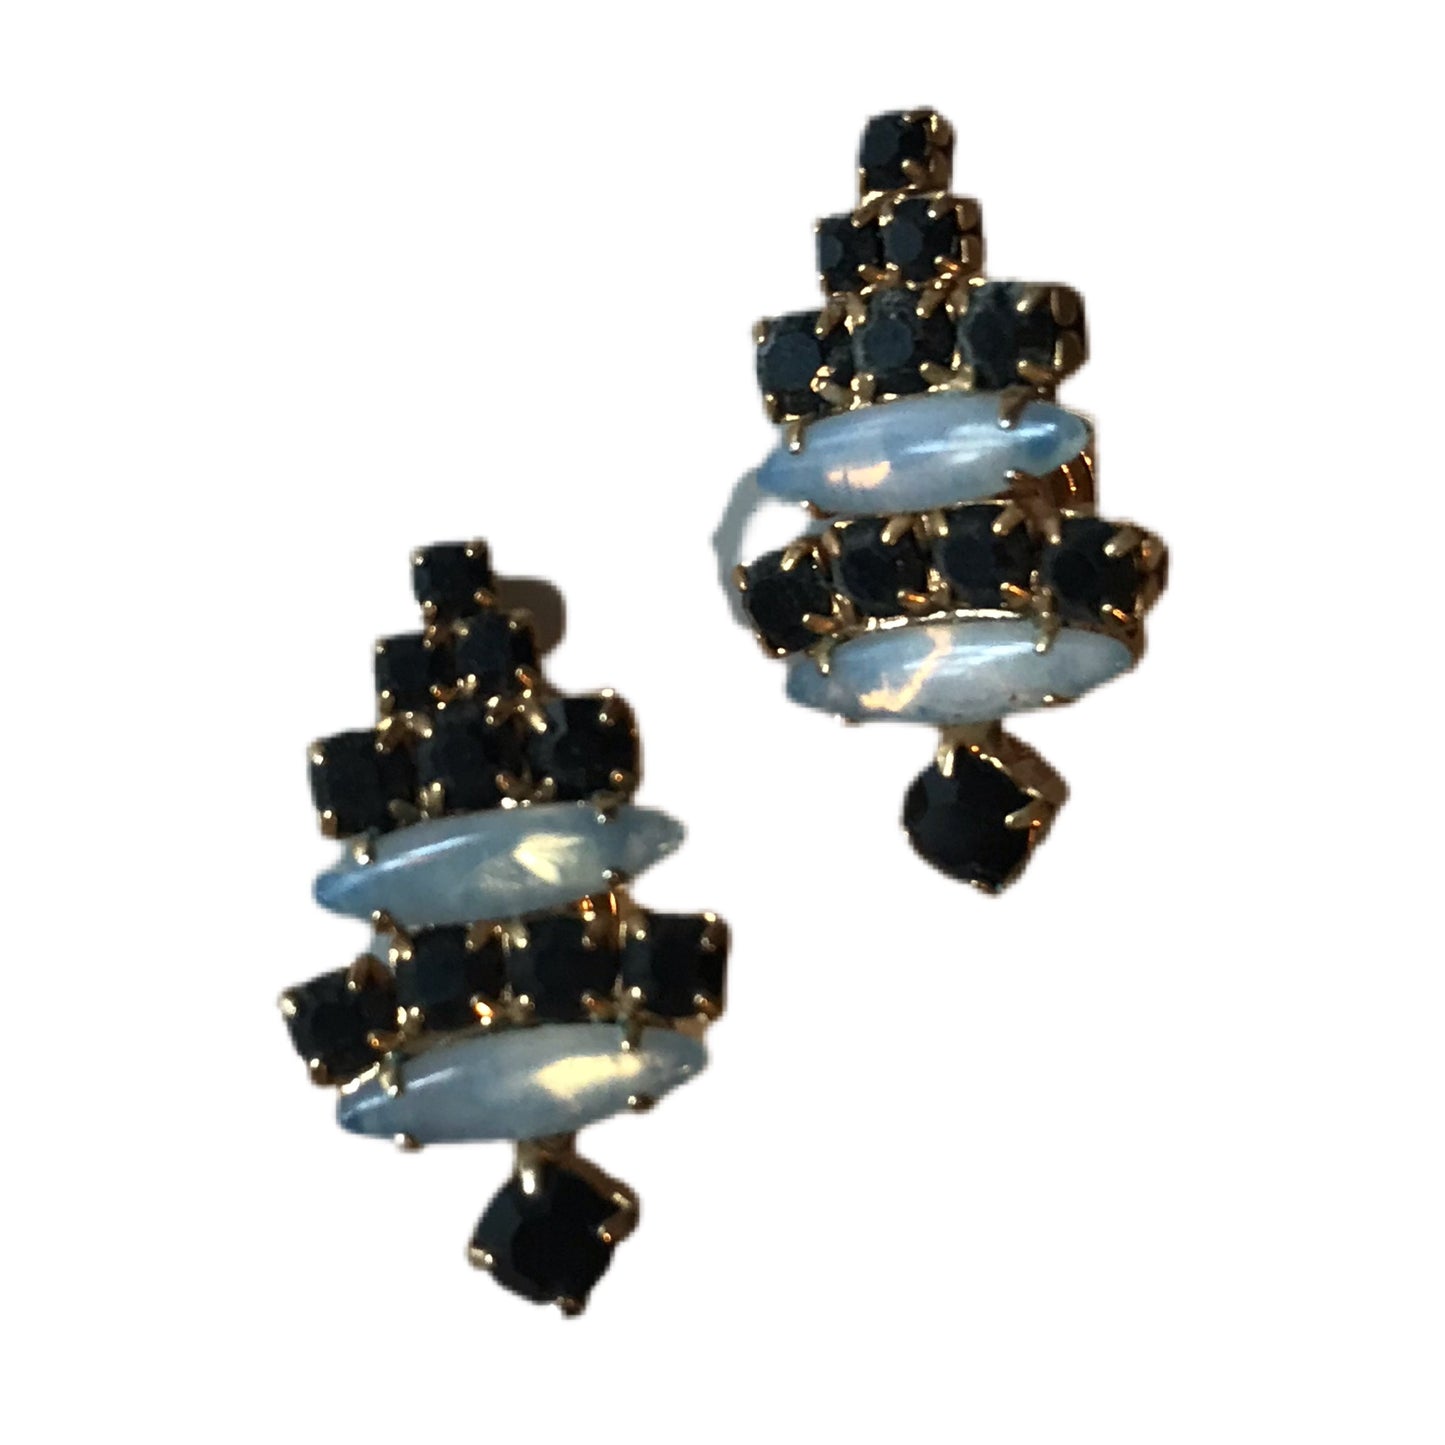 Black and White Tree Shaped Crystal Clip Earrings circa 1960s